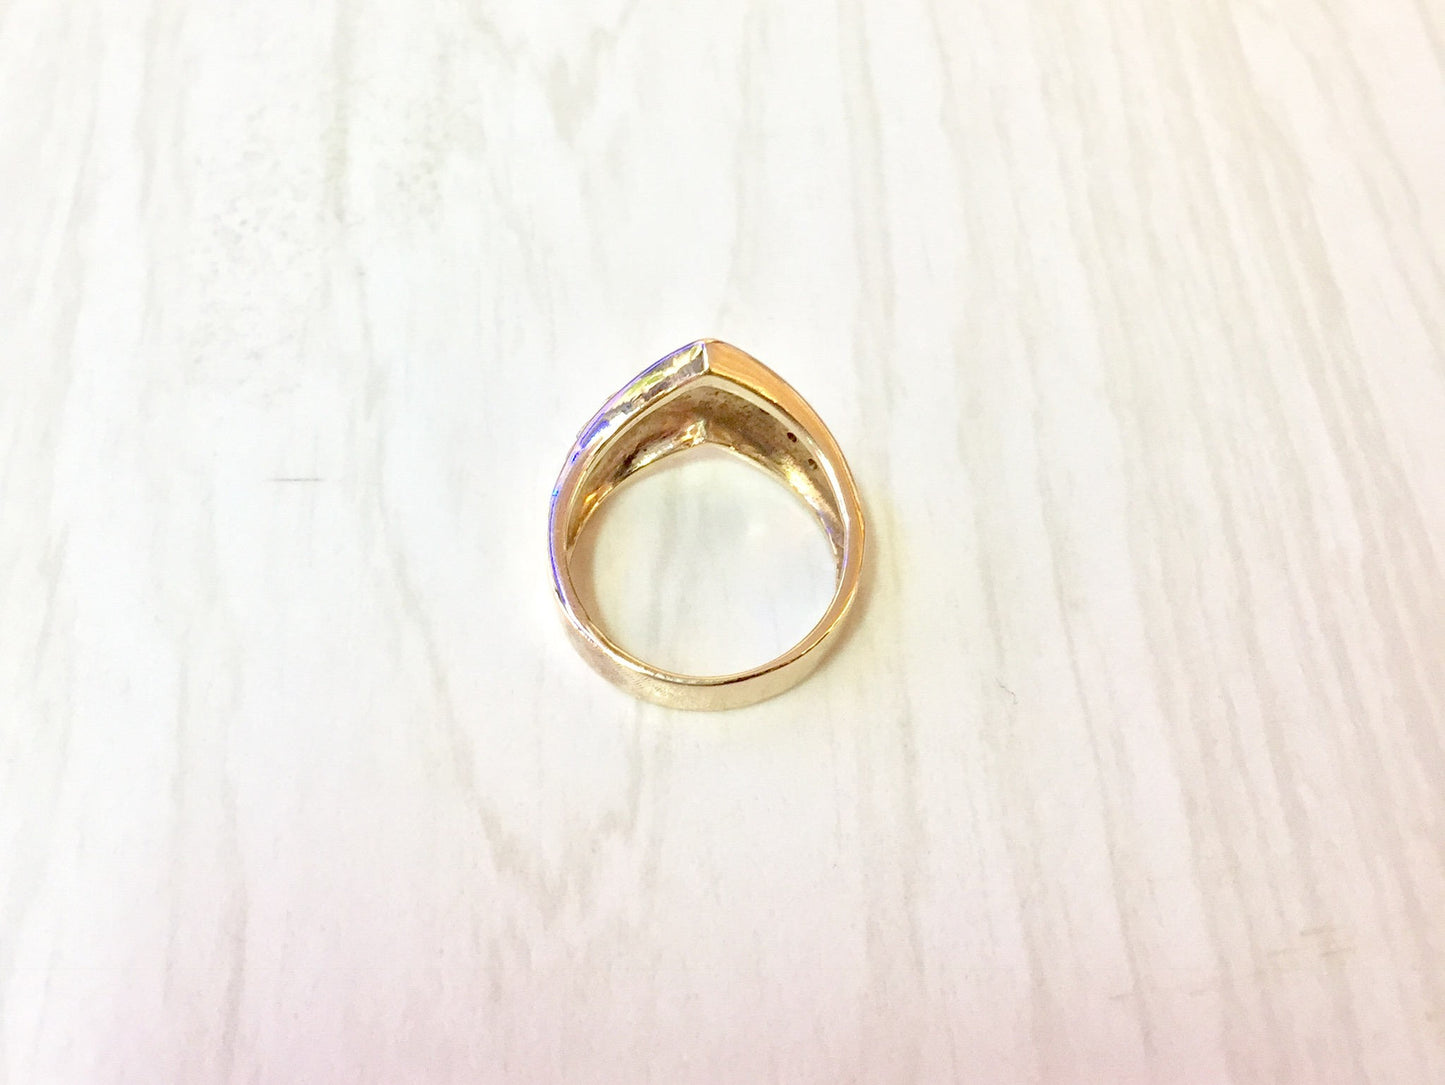 14K yellow gold chevron V-shaped ring with diamonds on light wooden background, top view